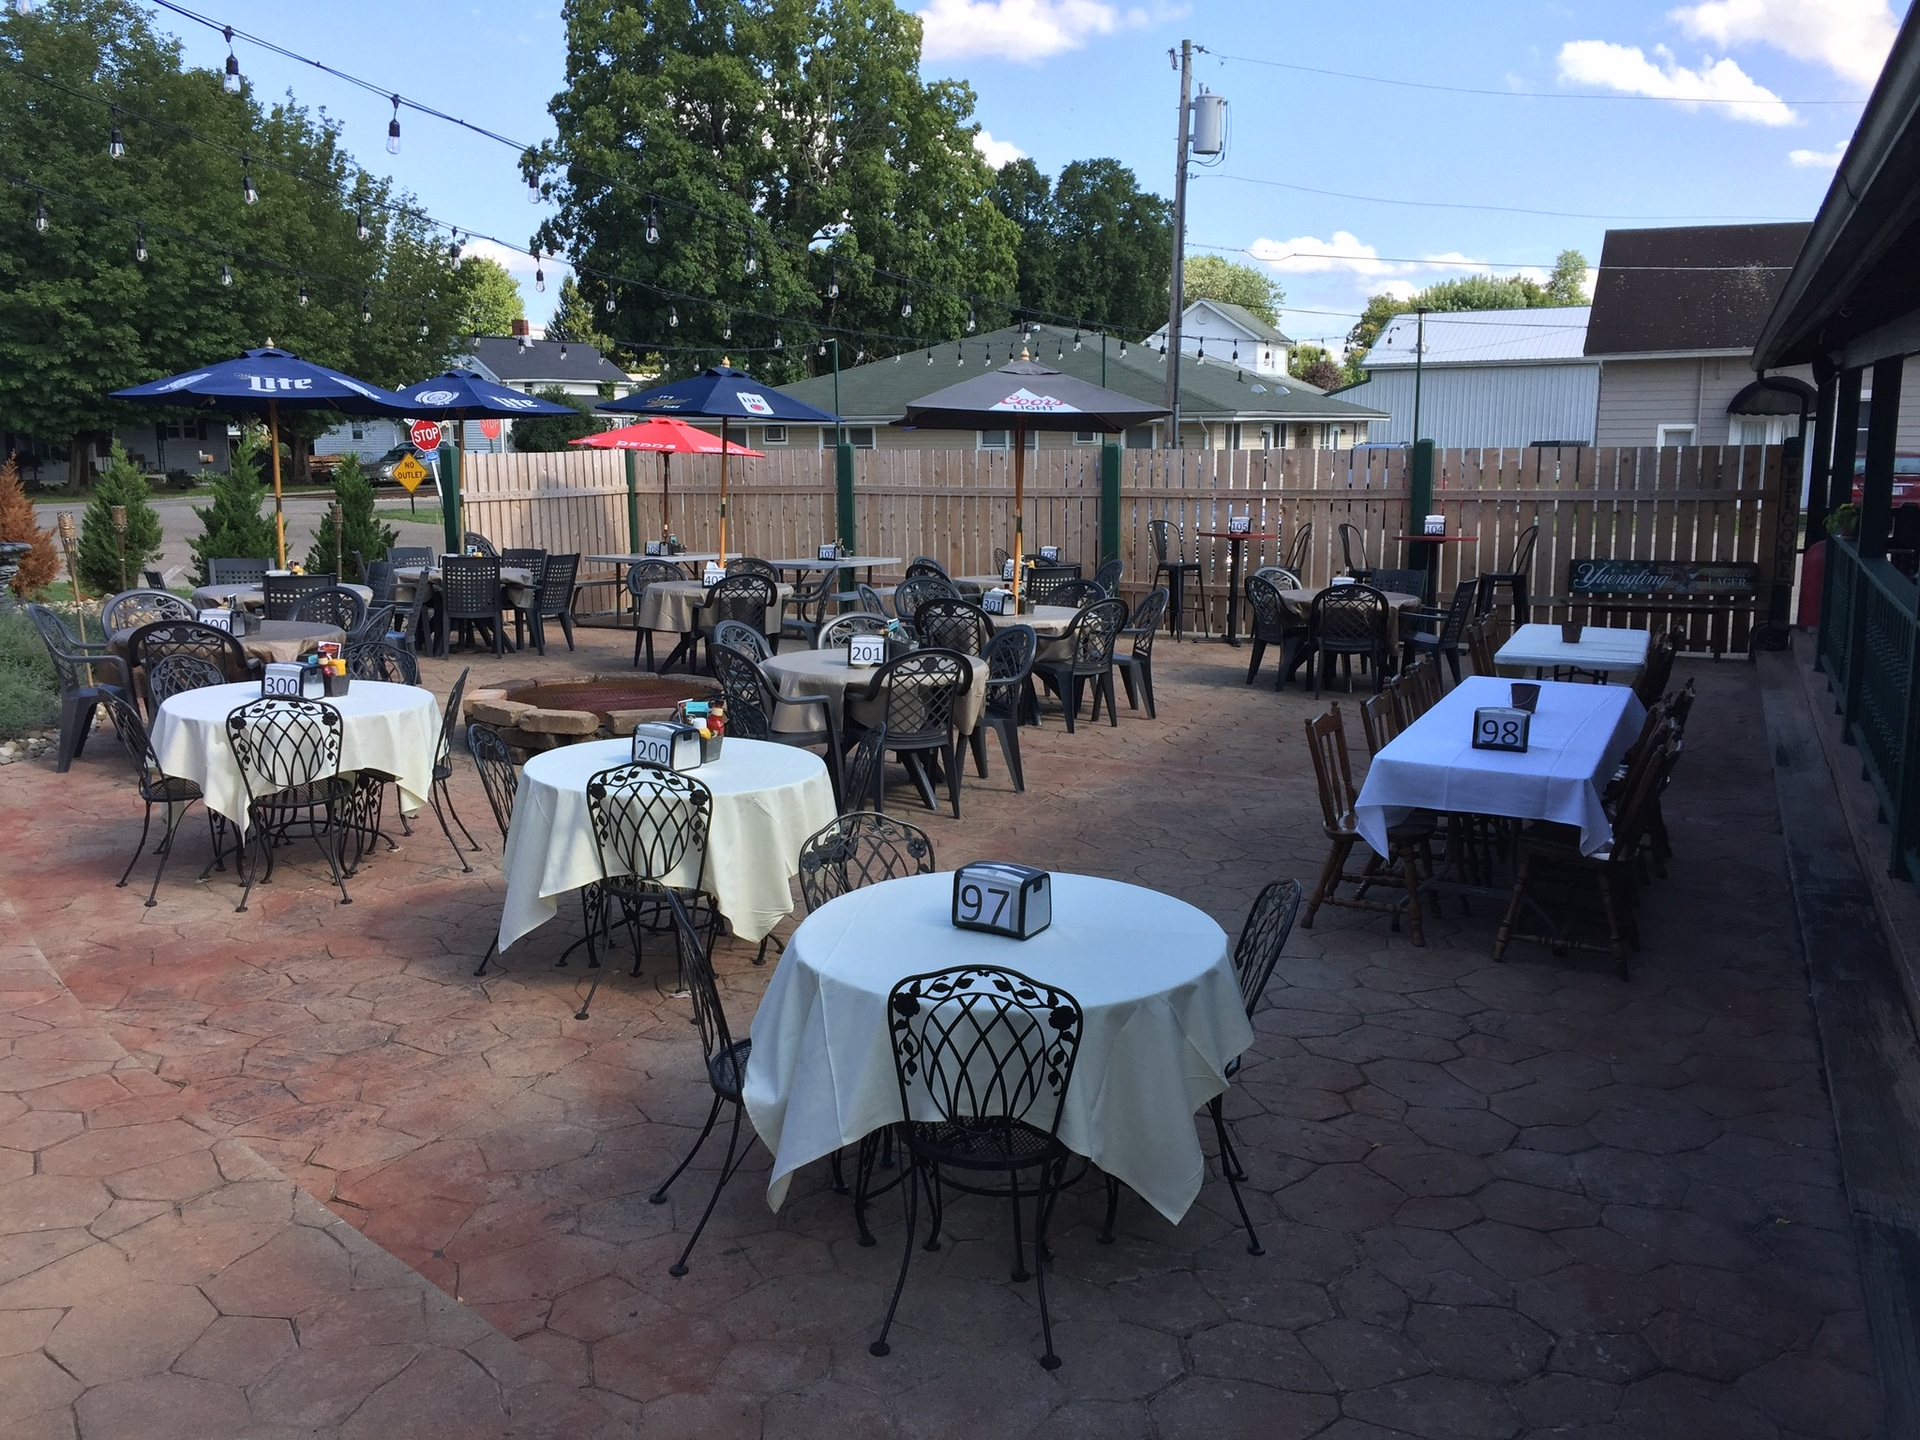 Enjoy Food and Drinks on our beautifully lit patio dining area.